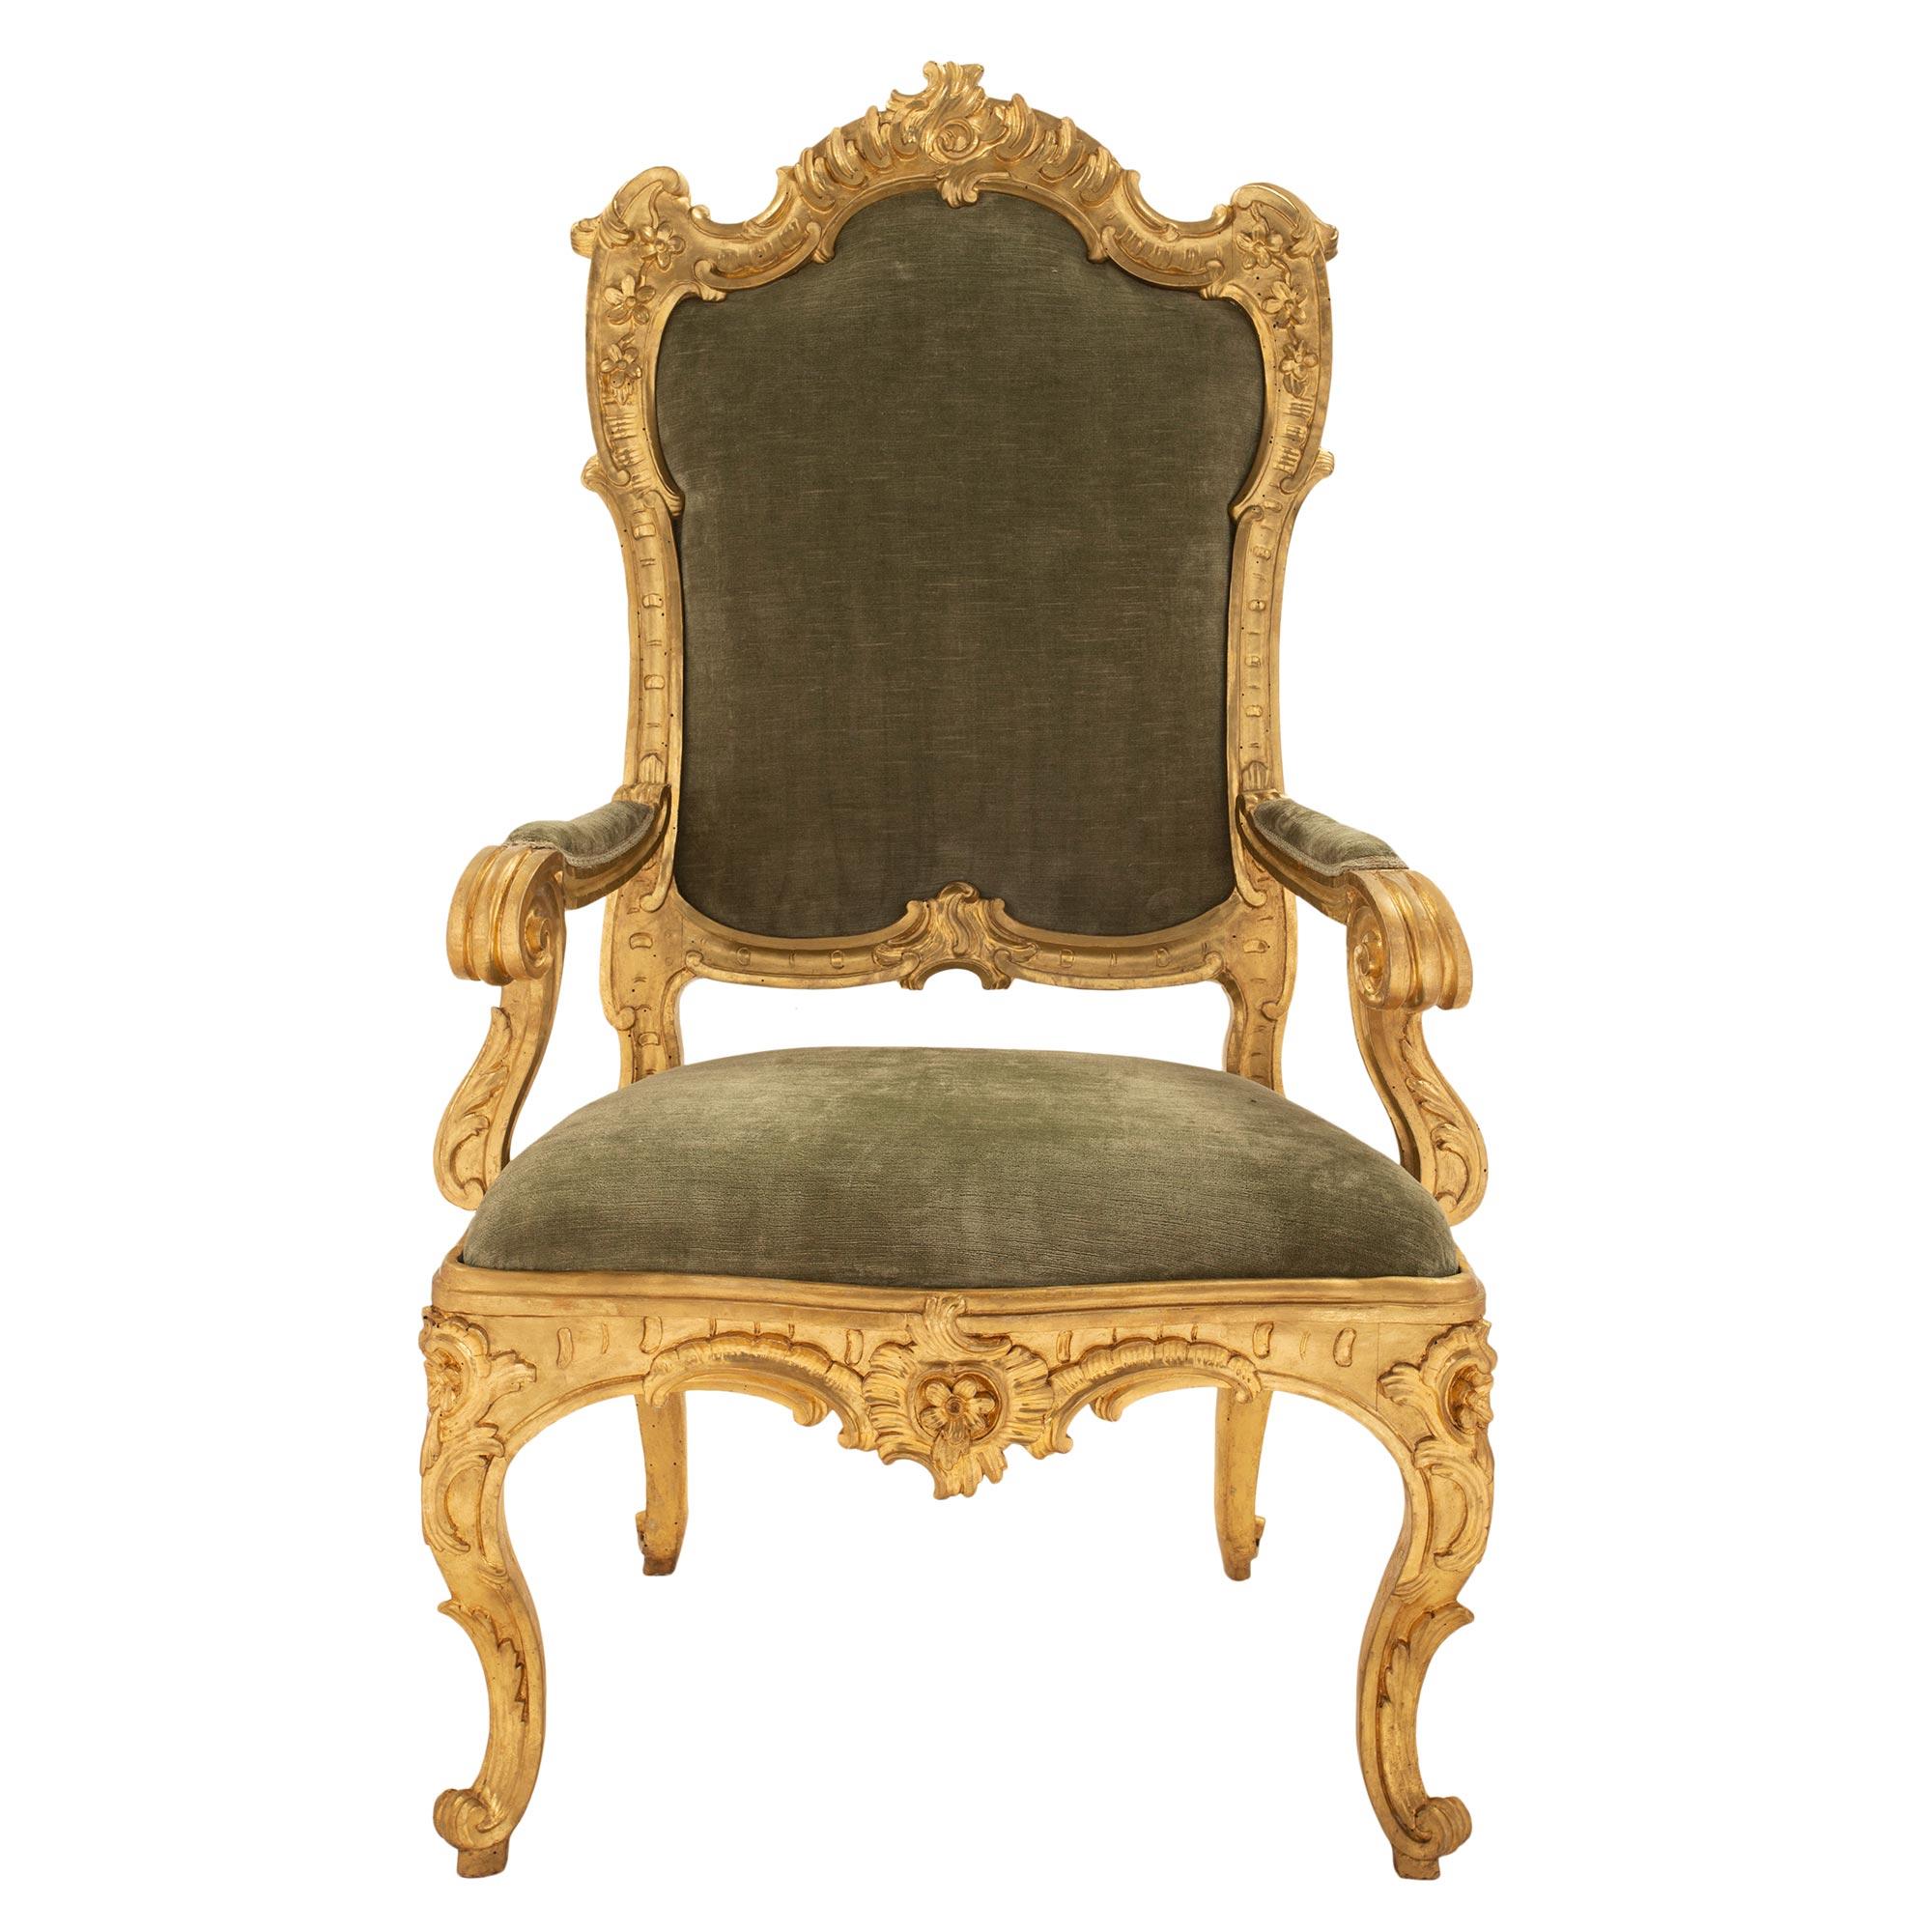 A spectacular and high quality pair of large scaled Roman 18th century Louis XV period giltwood throne armchairs. This pair of chairs are 'A Chasis' which signifies the ease of removing the seat and back enabling to change the upholstery for each